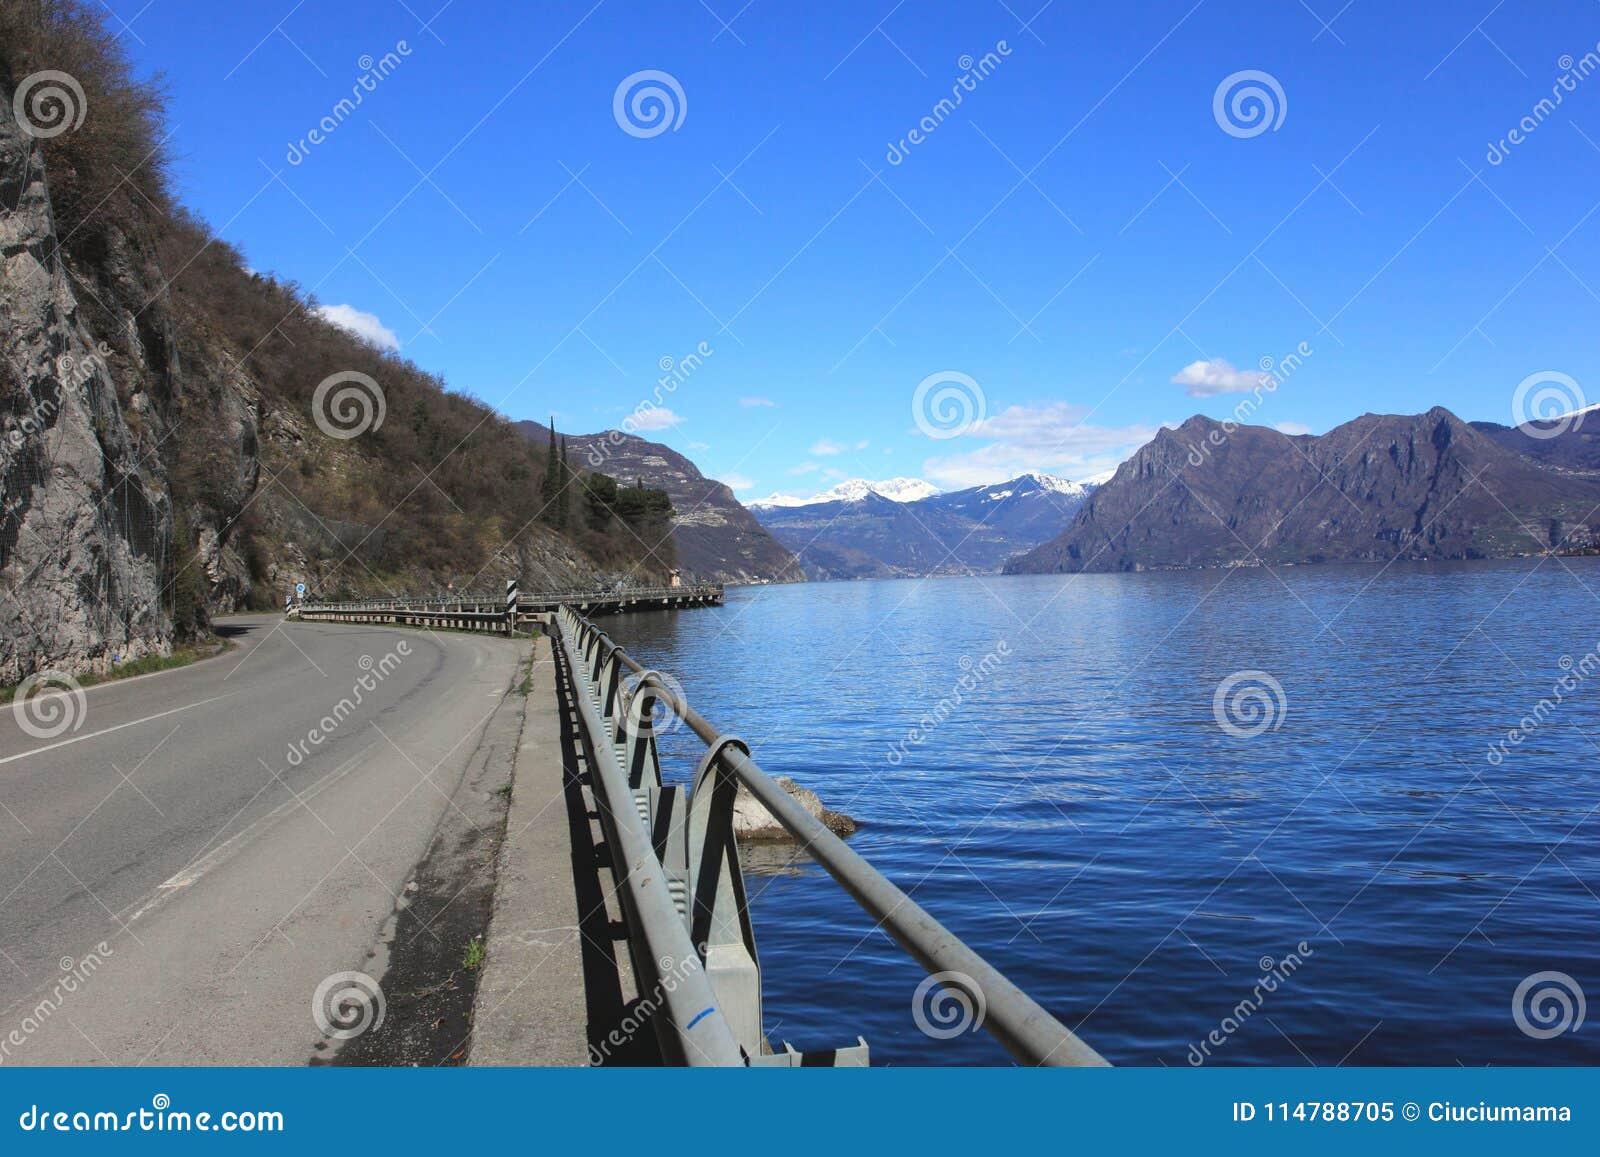 iseo lake - picturesque road along the lake